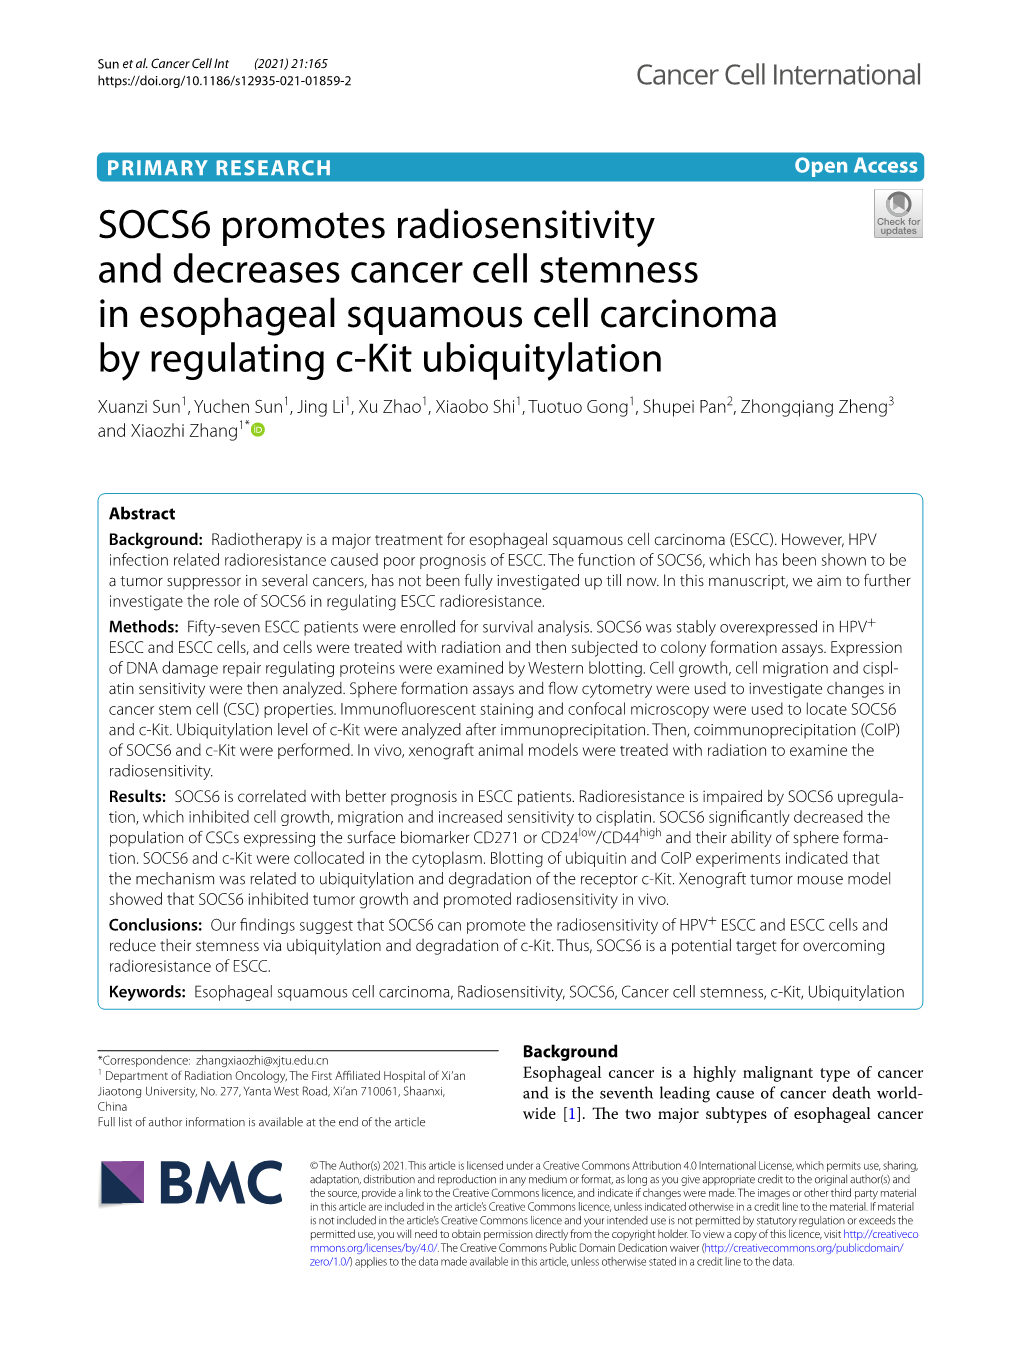 SOCS6 Promotes Radiosensitivity and Decreases Cancer Cell Stemness in Esophageal Squamous Cell Carcinoma by Regulating C-Kit